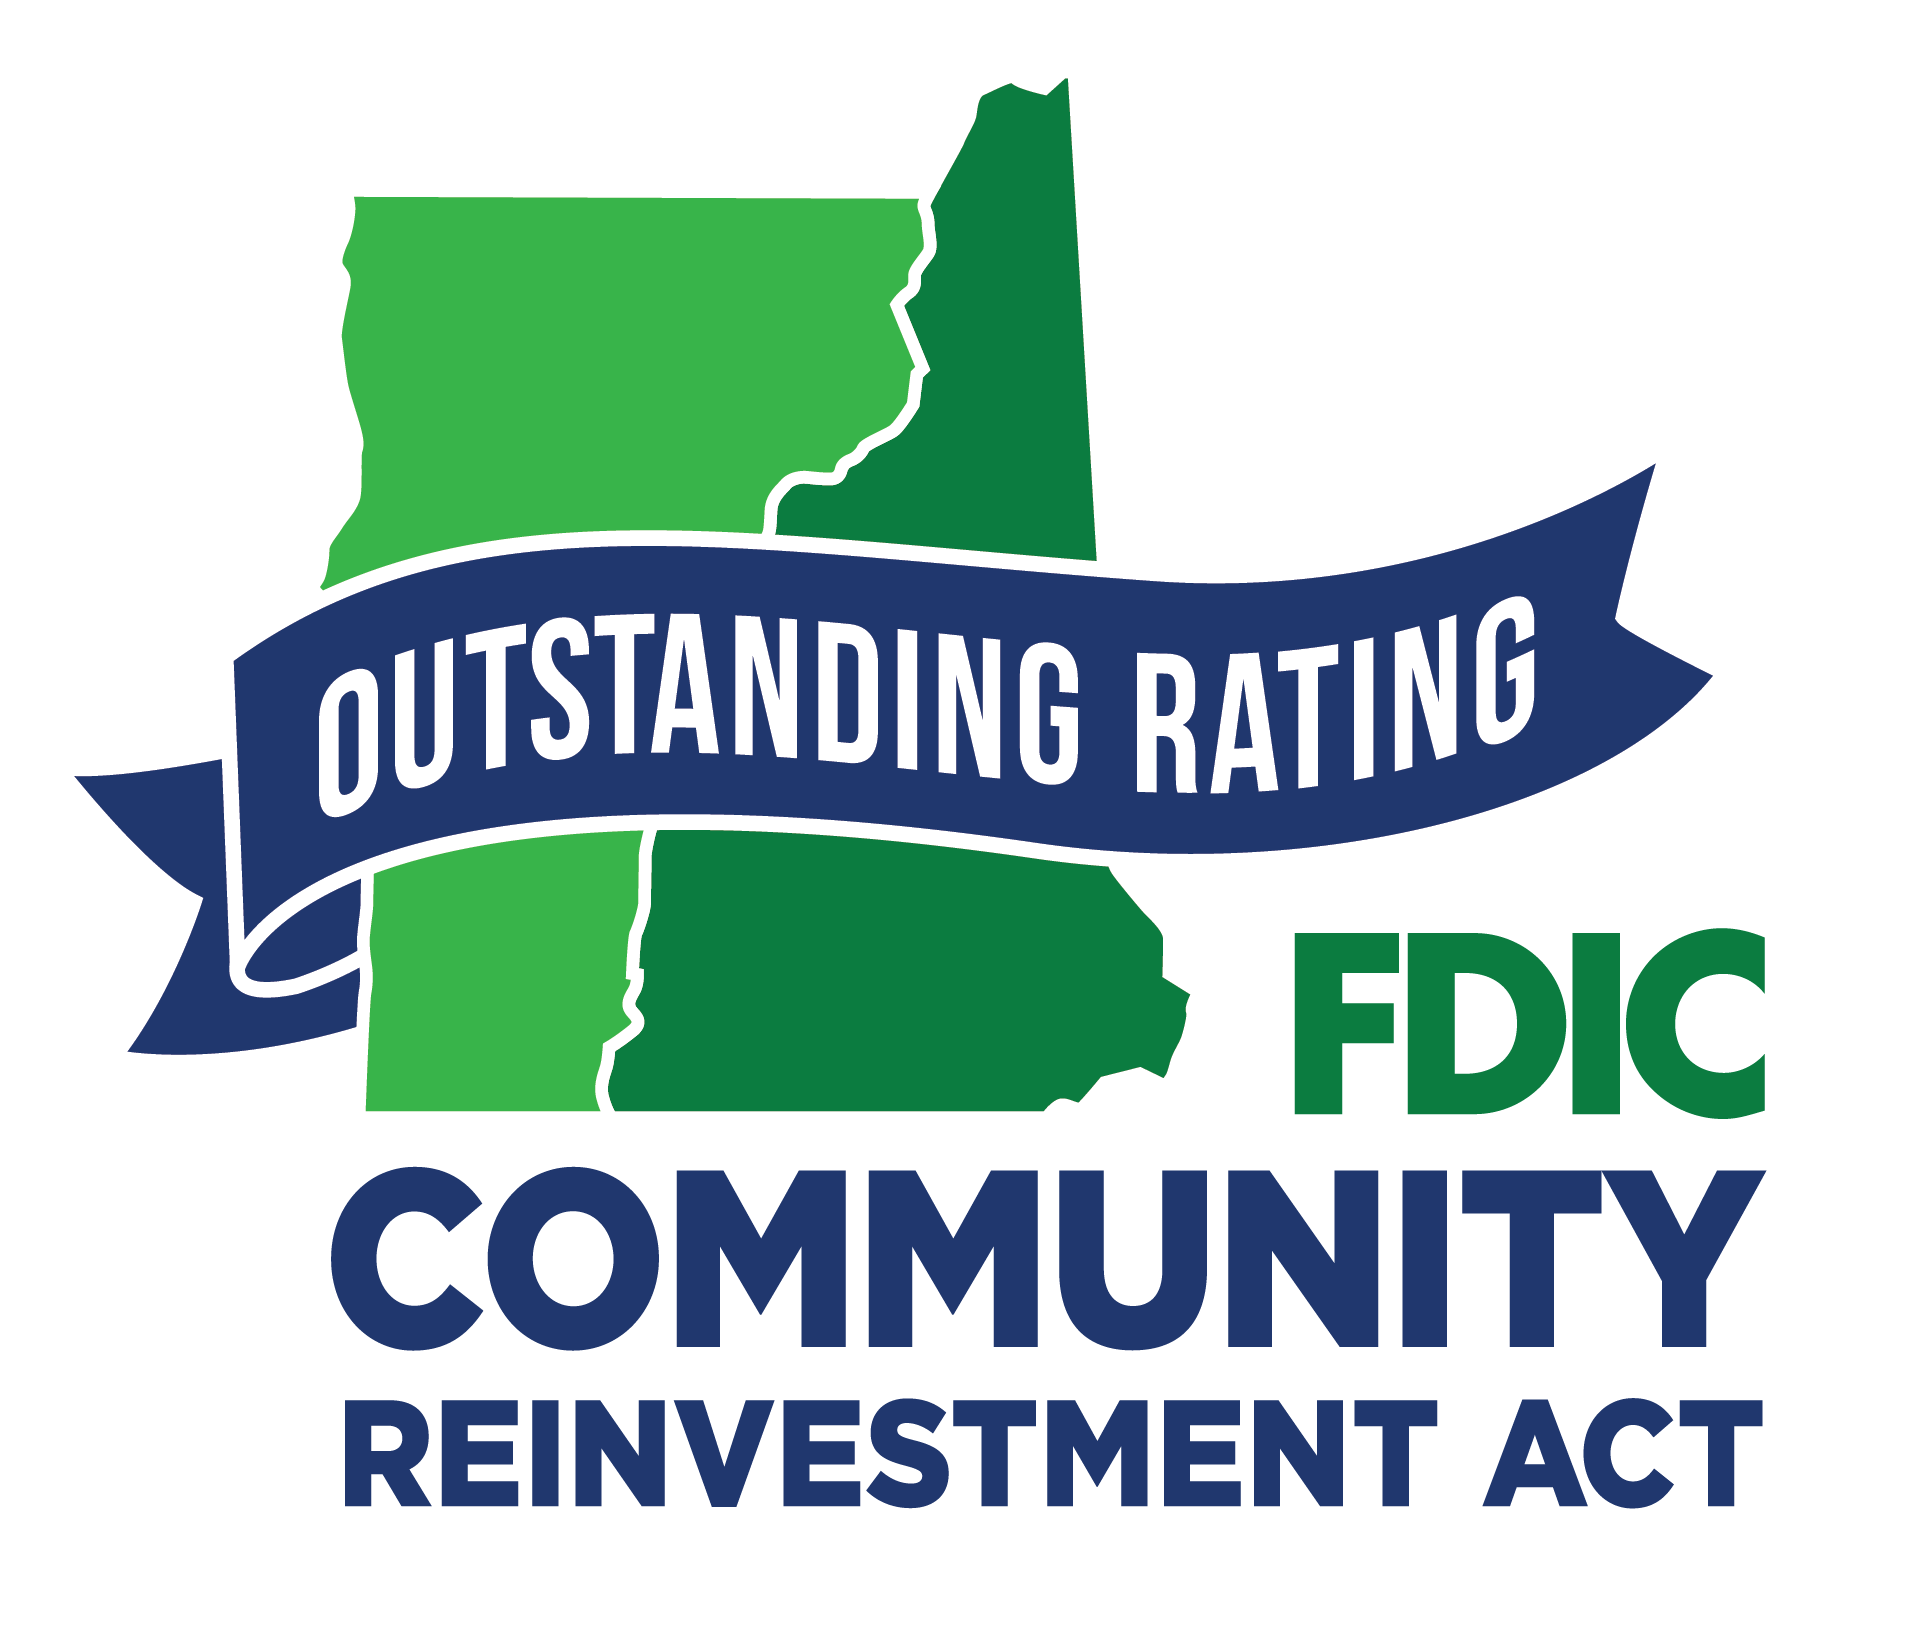 Outstanding rating: FDIC Community Reinvestment Act